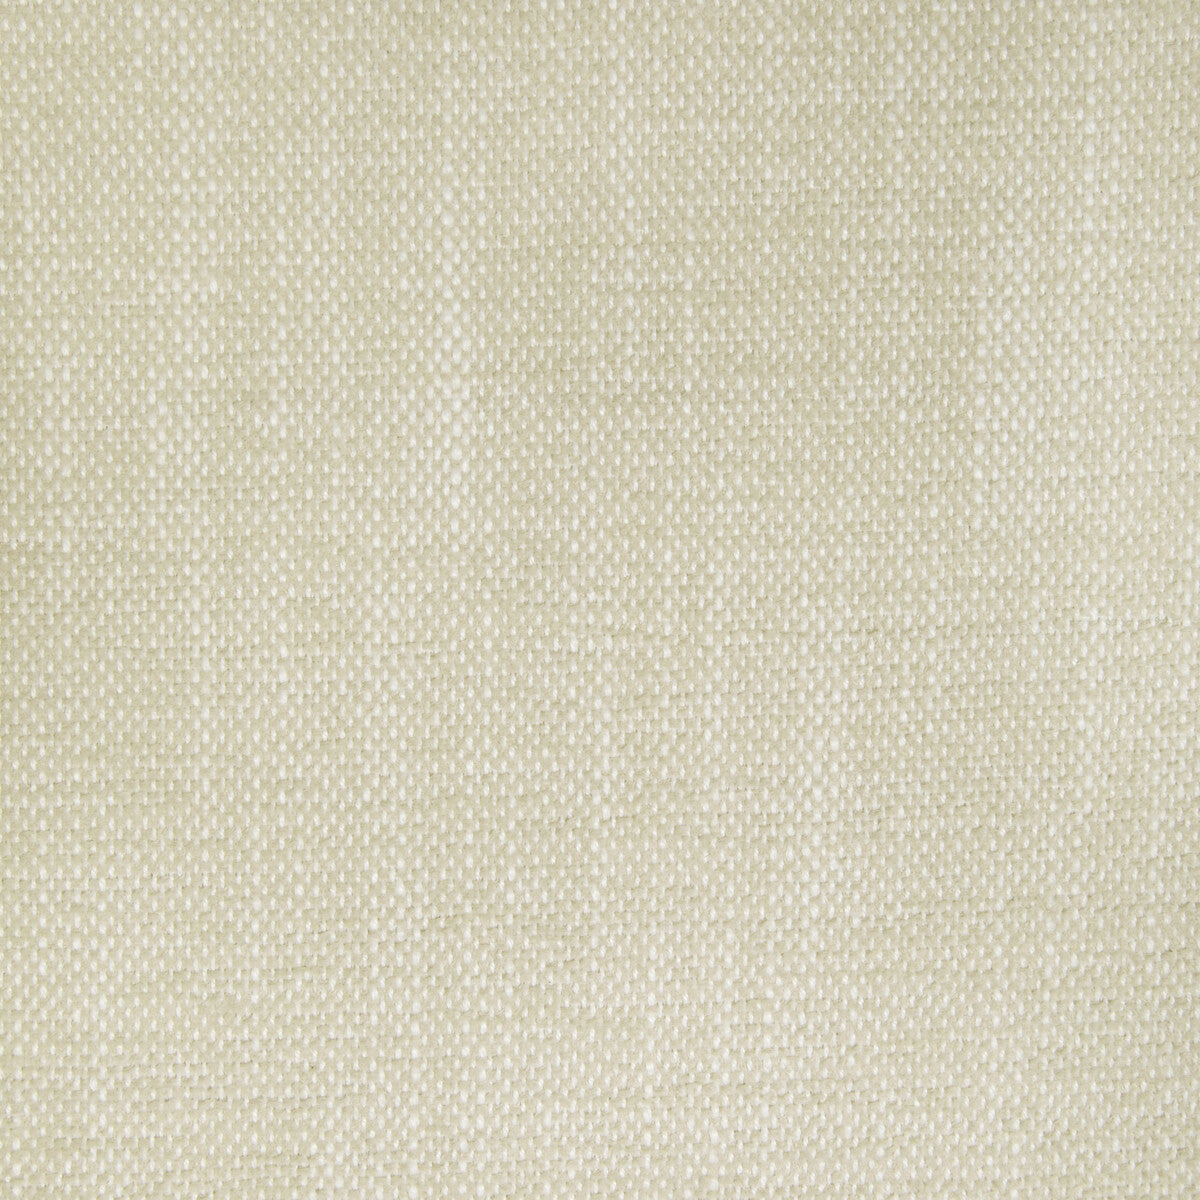 Kravet Smart-36885 fabric in 1 color - pattern 36885.1.0 - by Kravet Smart in the Inside Out Performance Fabrics collection